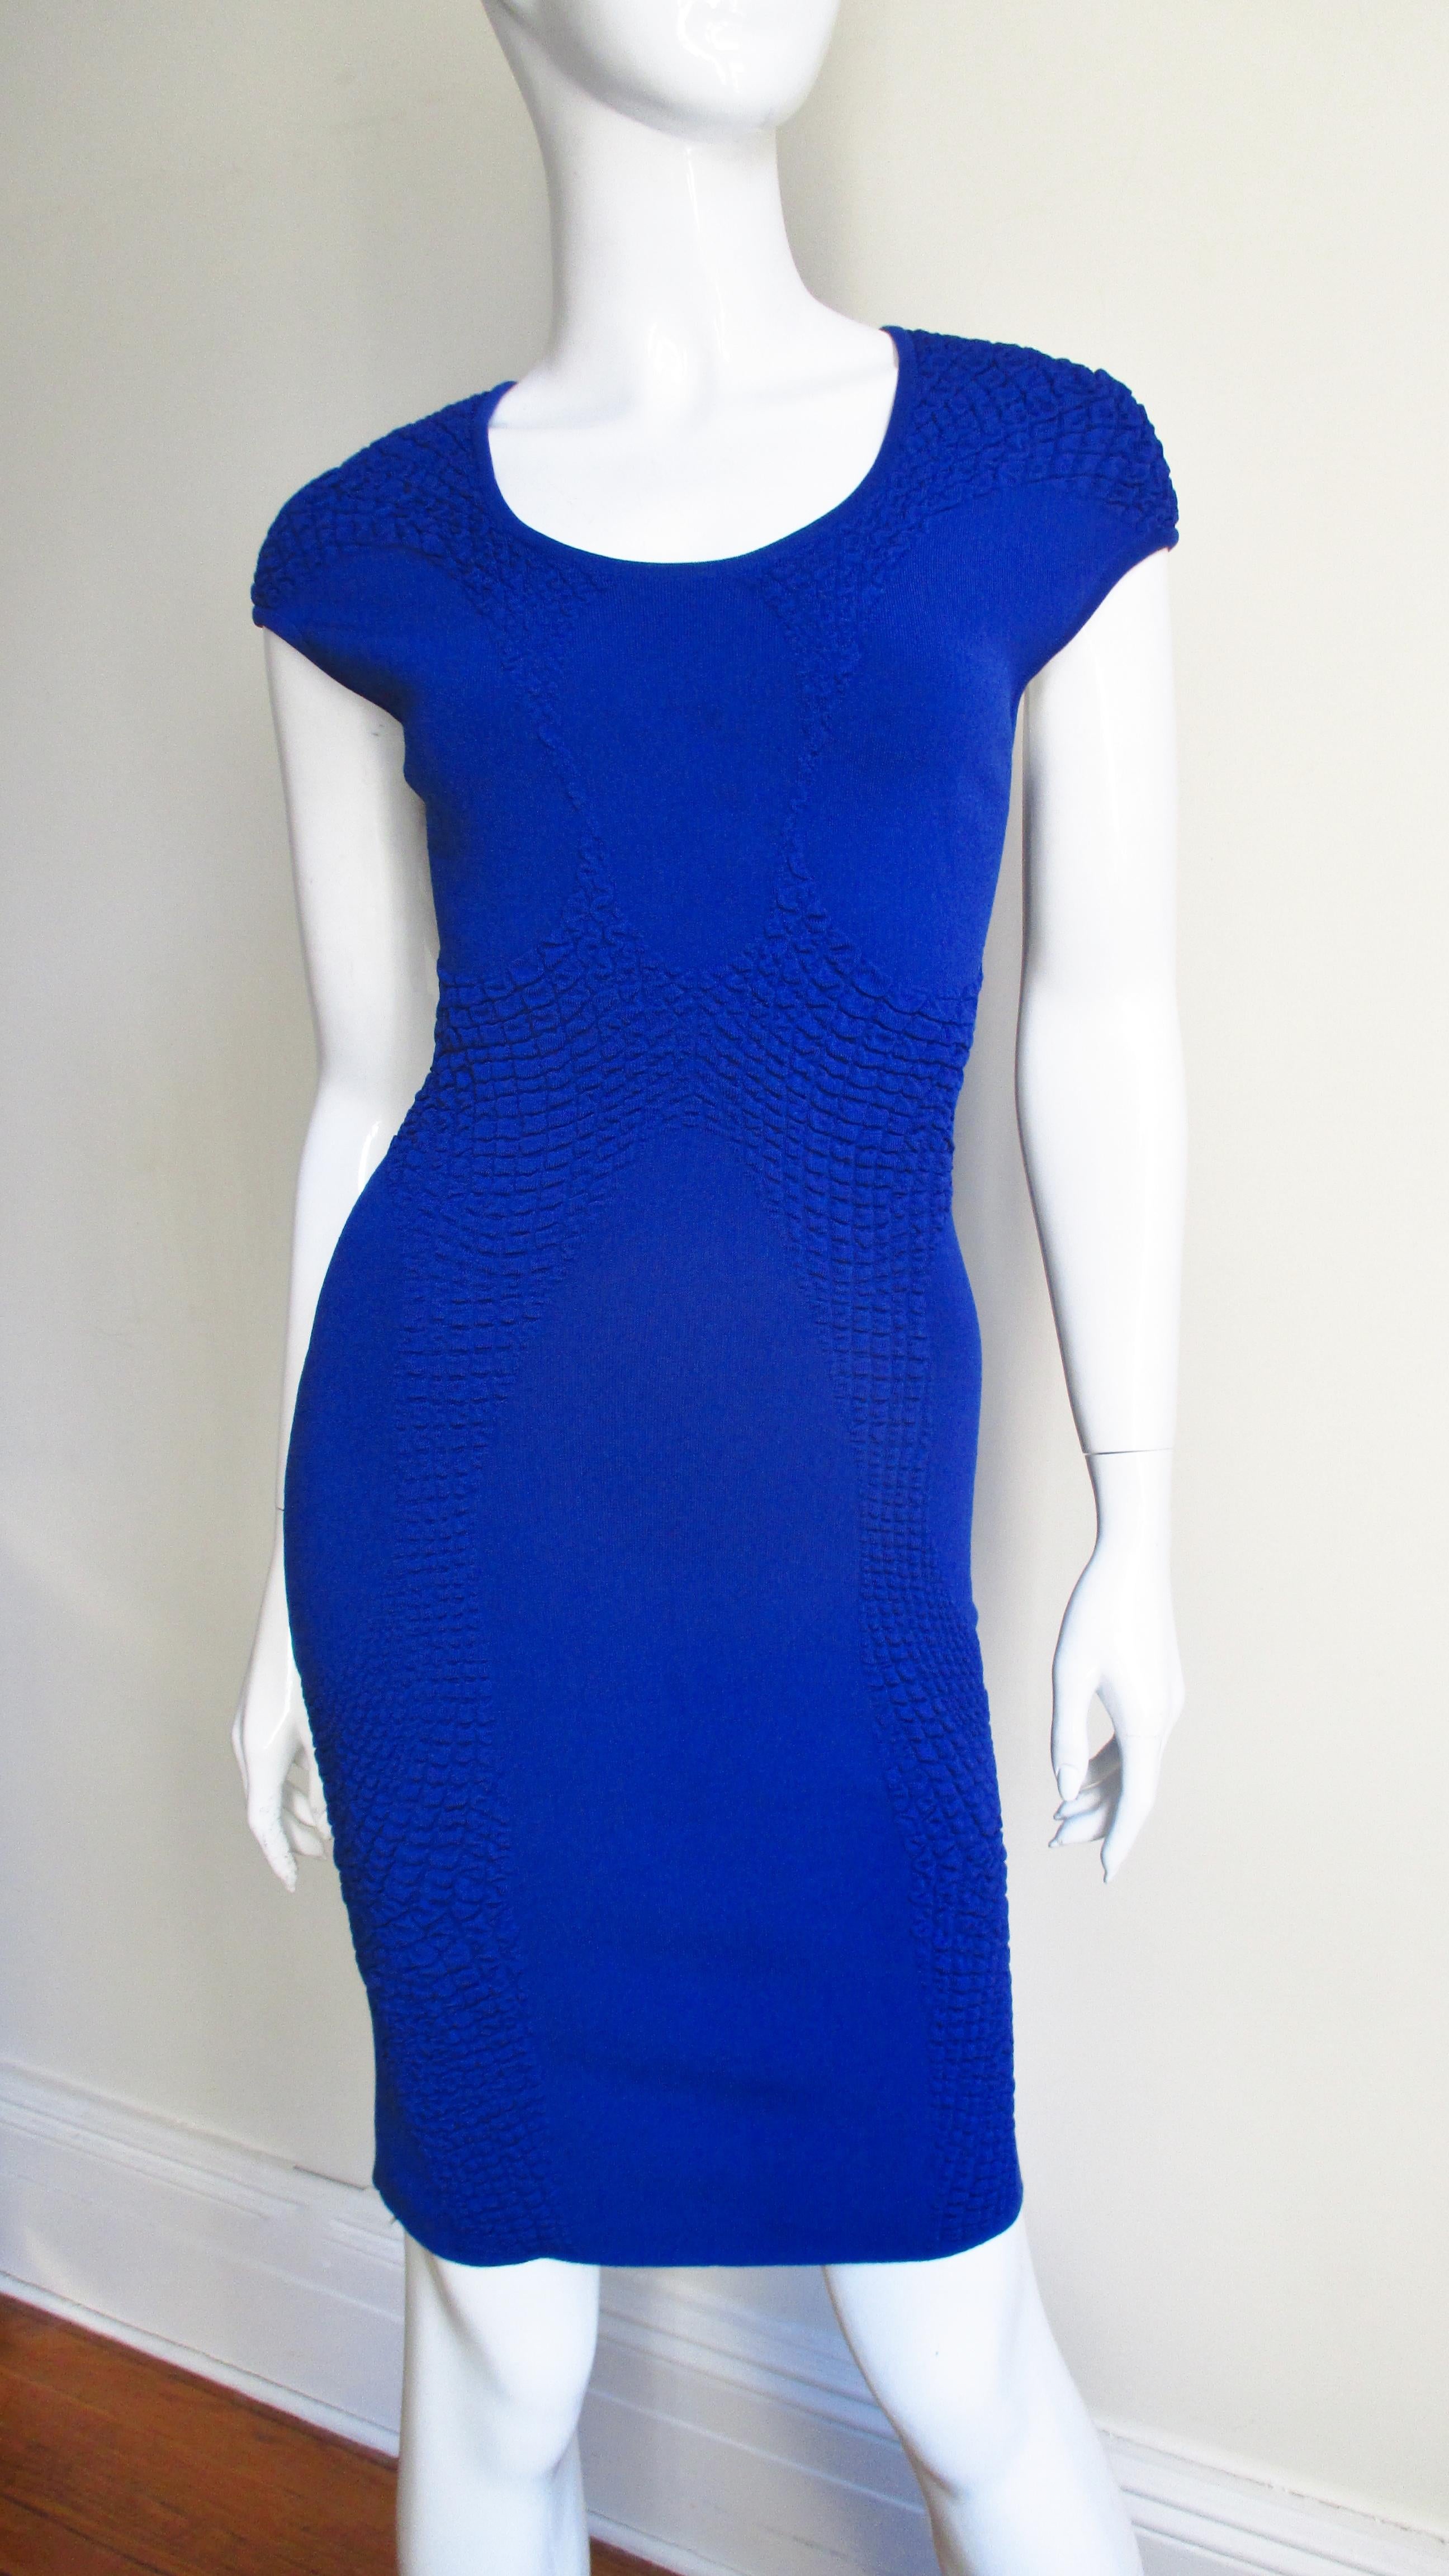 A vibrant blue knit bodycon dress from Alexander McQueen. It is highlighted down the front and back with strategically placed figure enhancing subtle pebble textured knit detail in the same fabric. It has a crew neckline and cap sleeves. There are